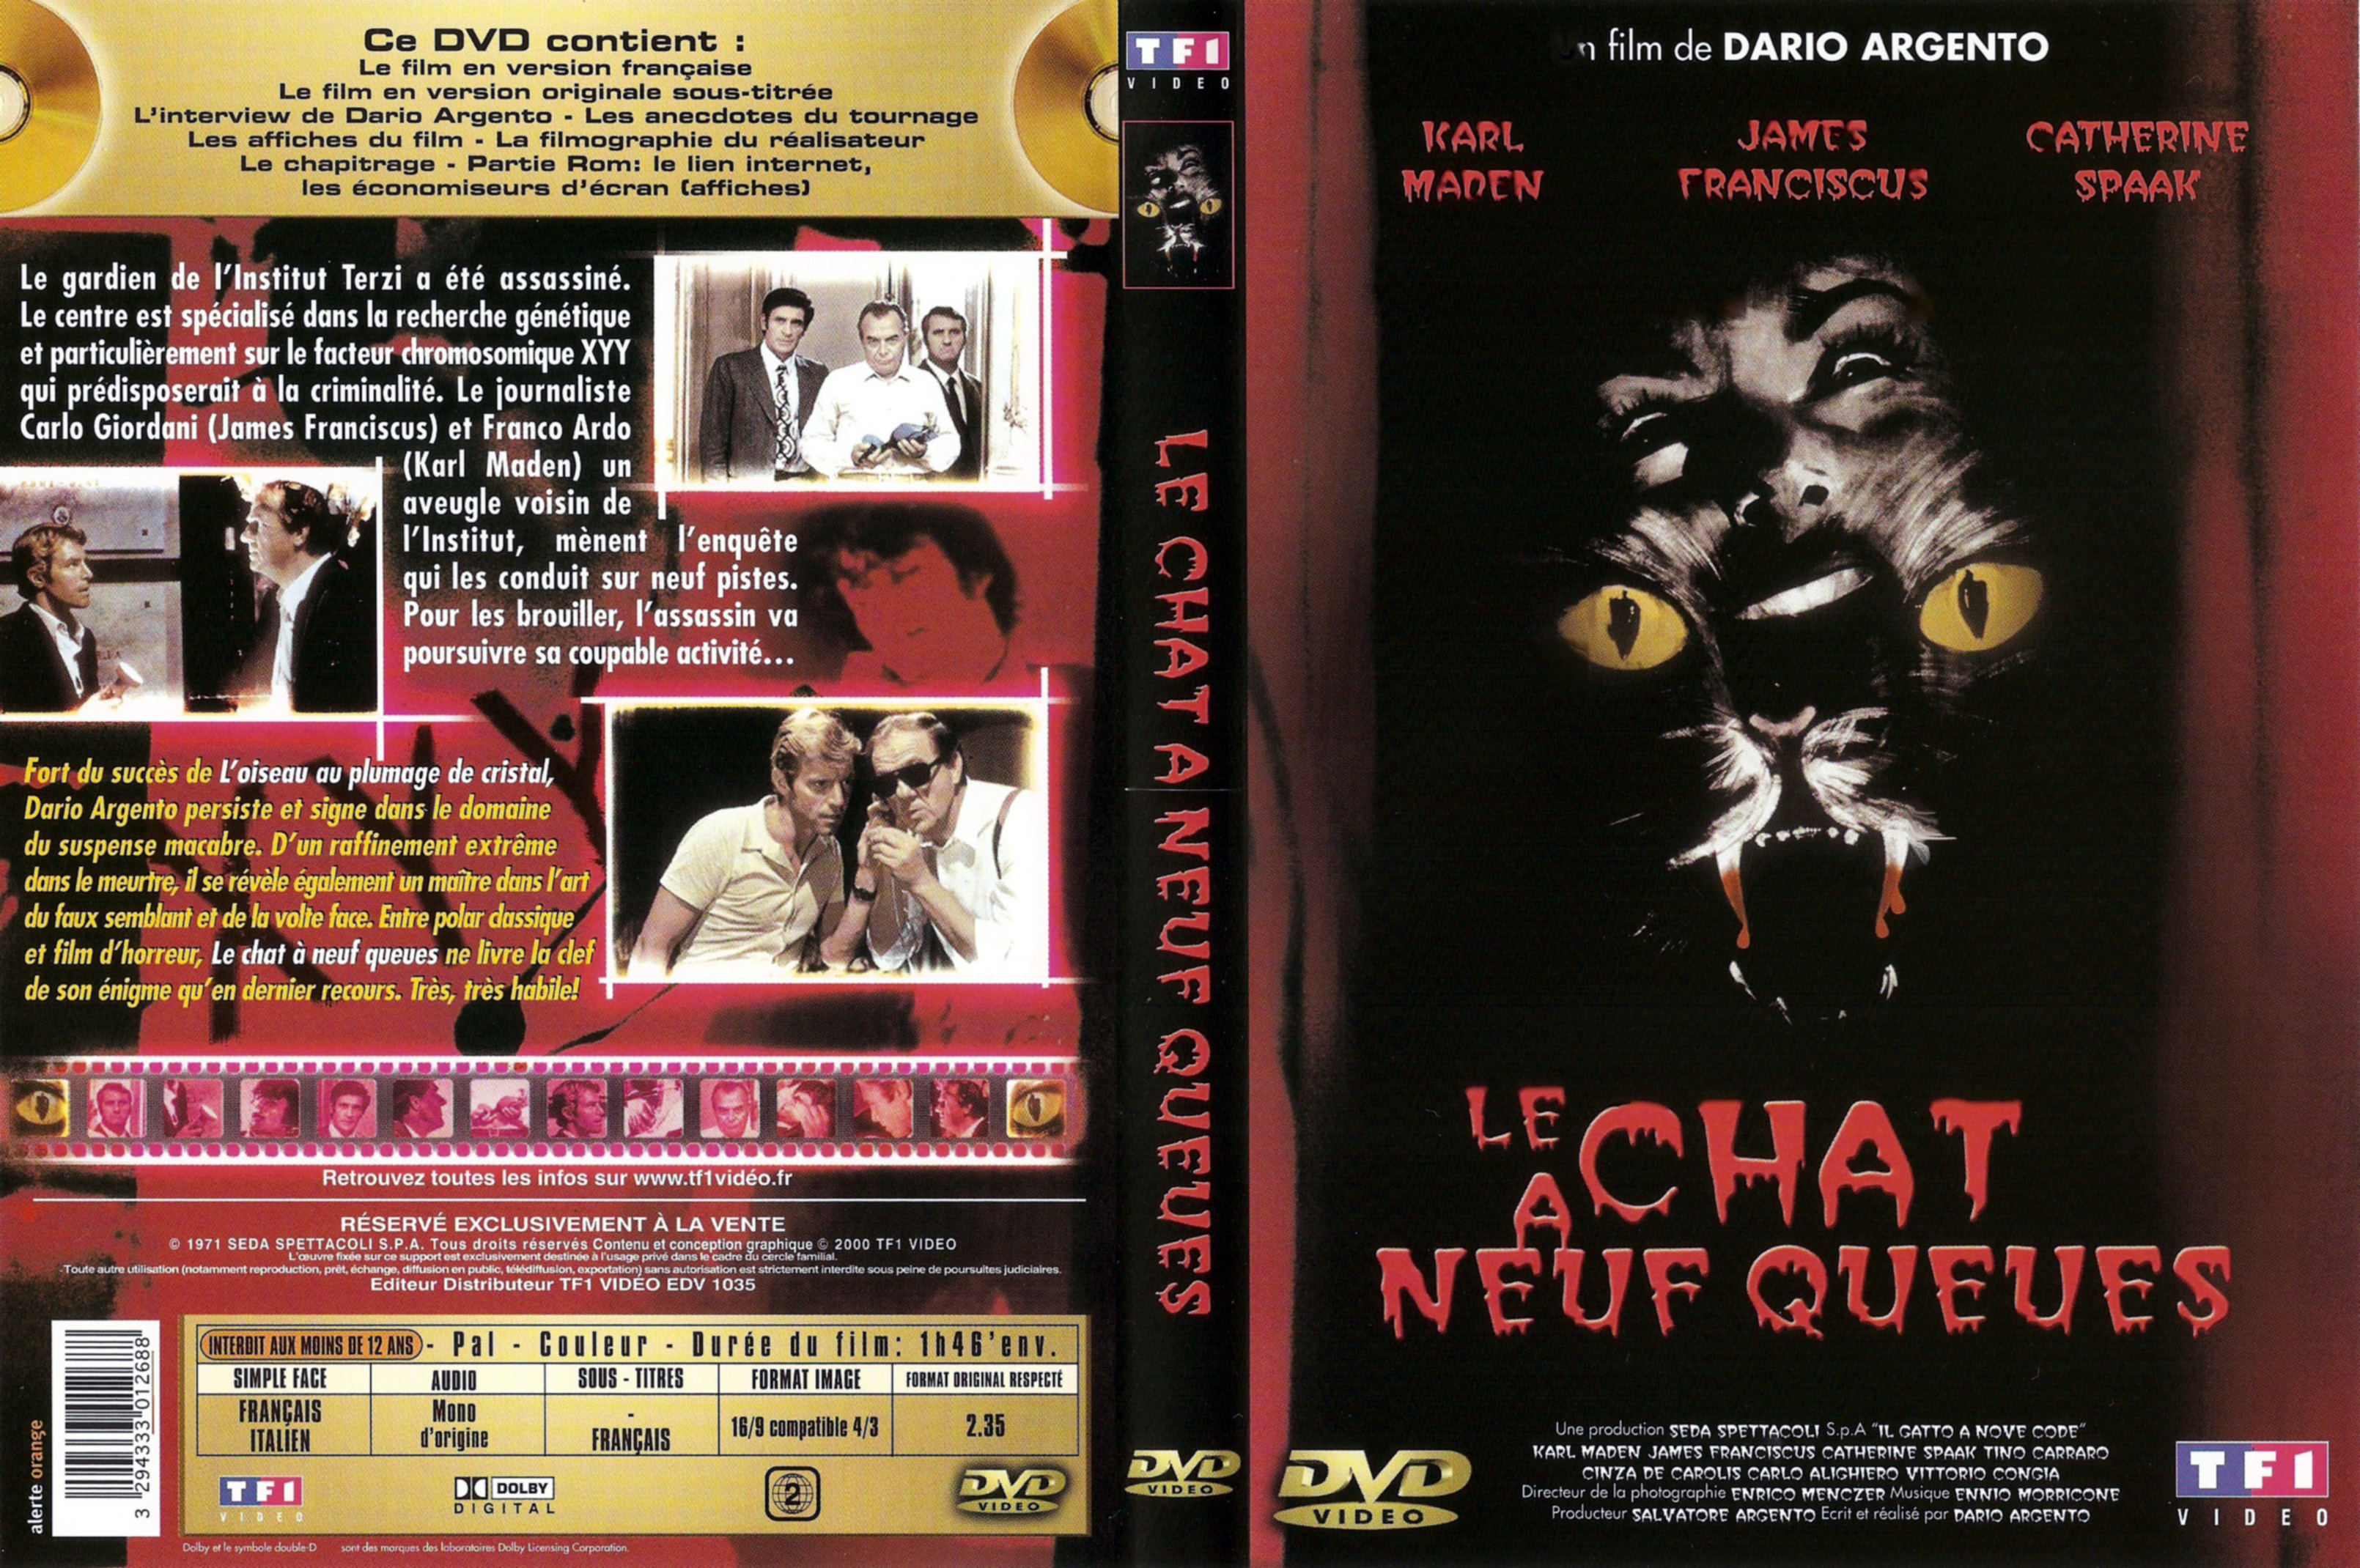 Jaquette DVD Le chat a neuf queues